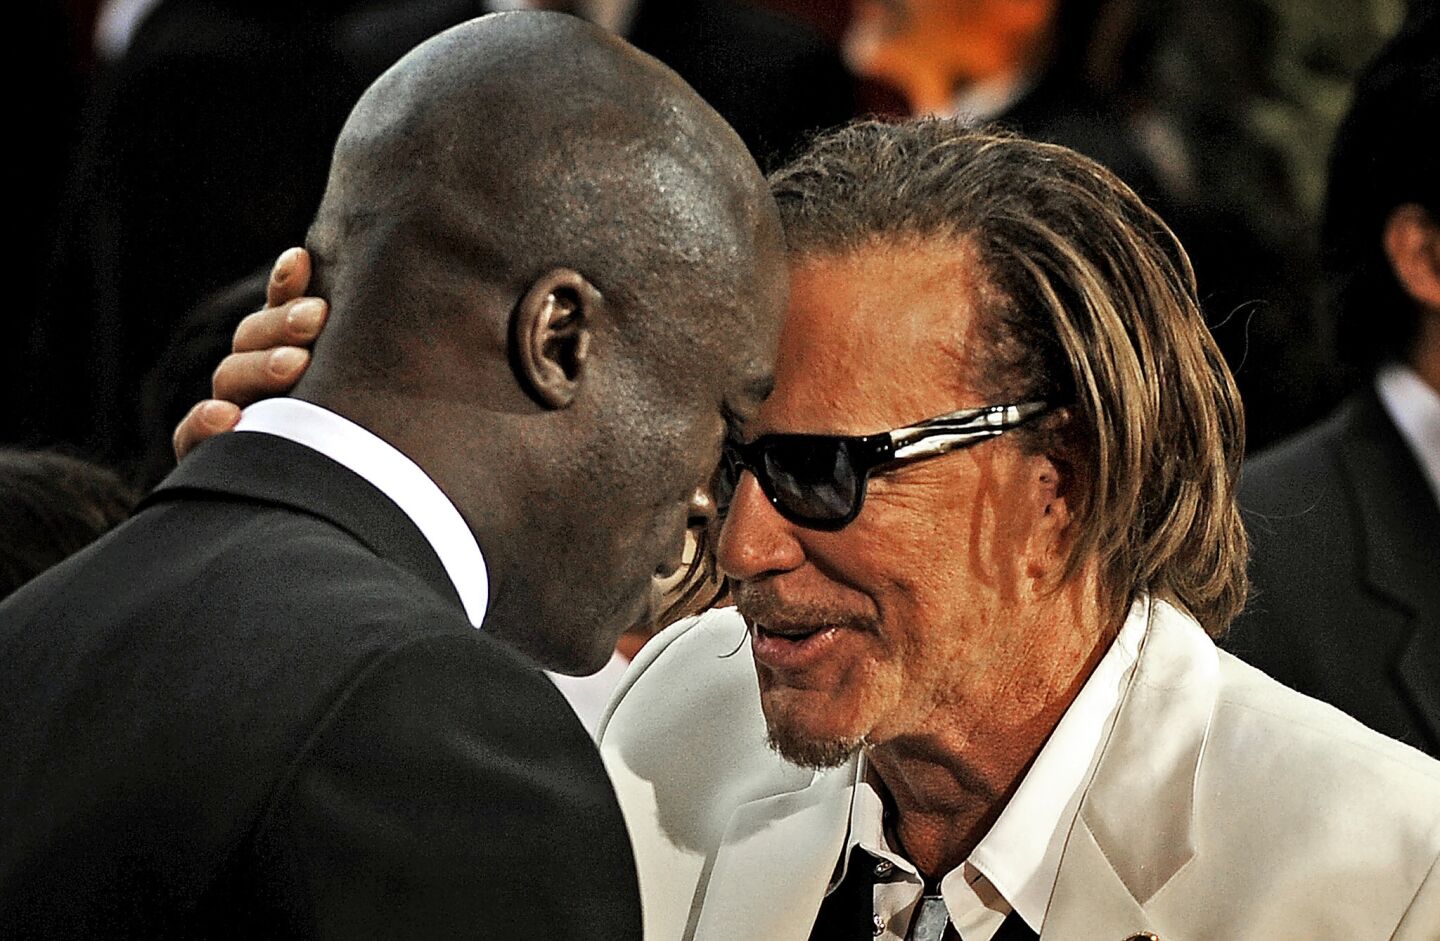 Seal, left, and Mickey Rourke during the 81st Academy Awards at the Kodak Theatre.